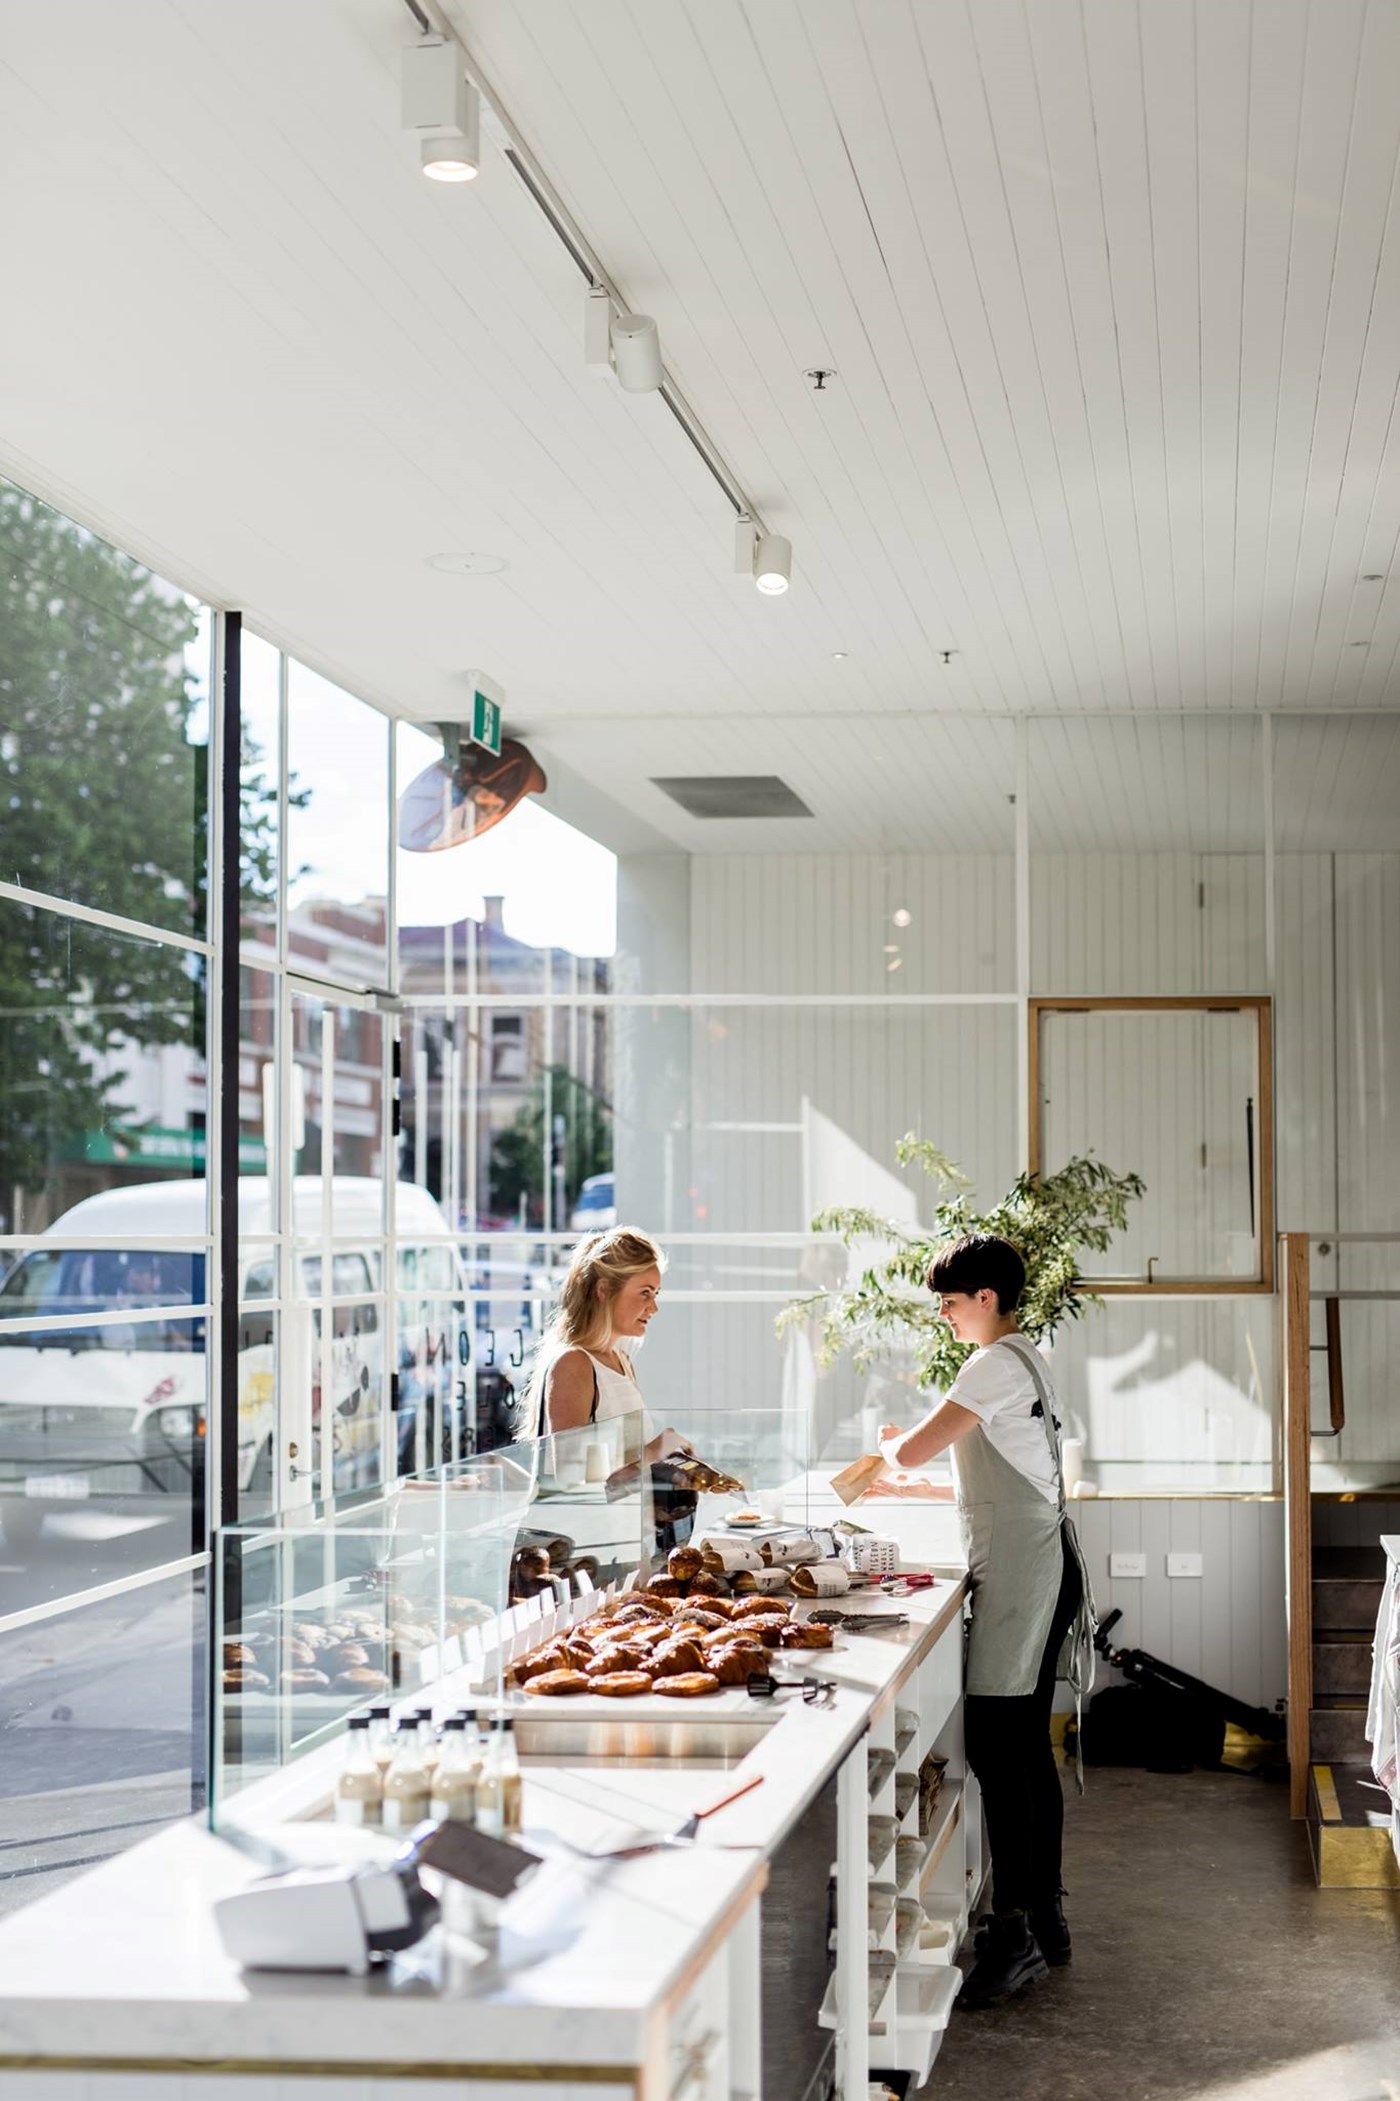 Baked goods at Pigeon Hole in Tasmania